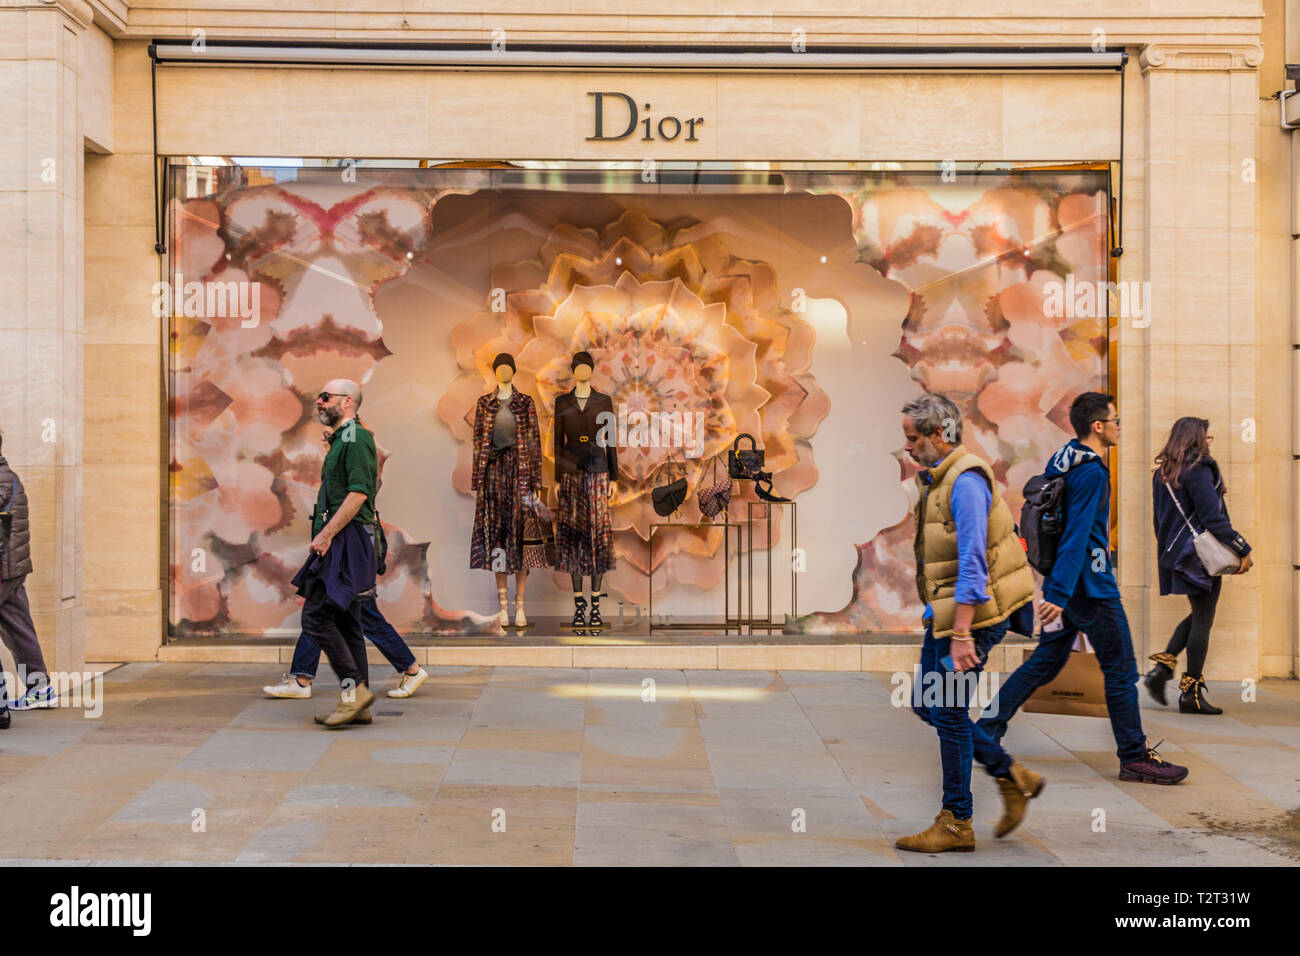 April 2019. London. A view of the Dior store on Bond street in london ...